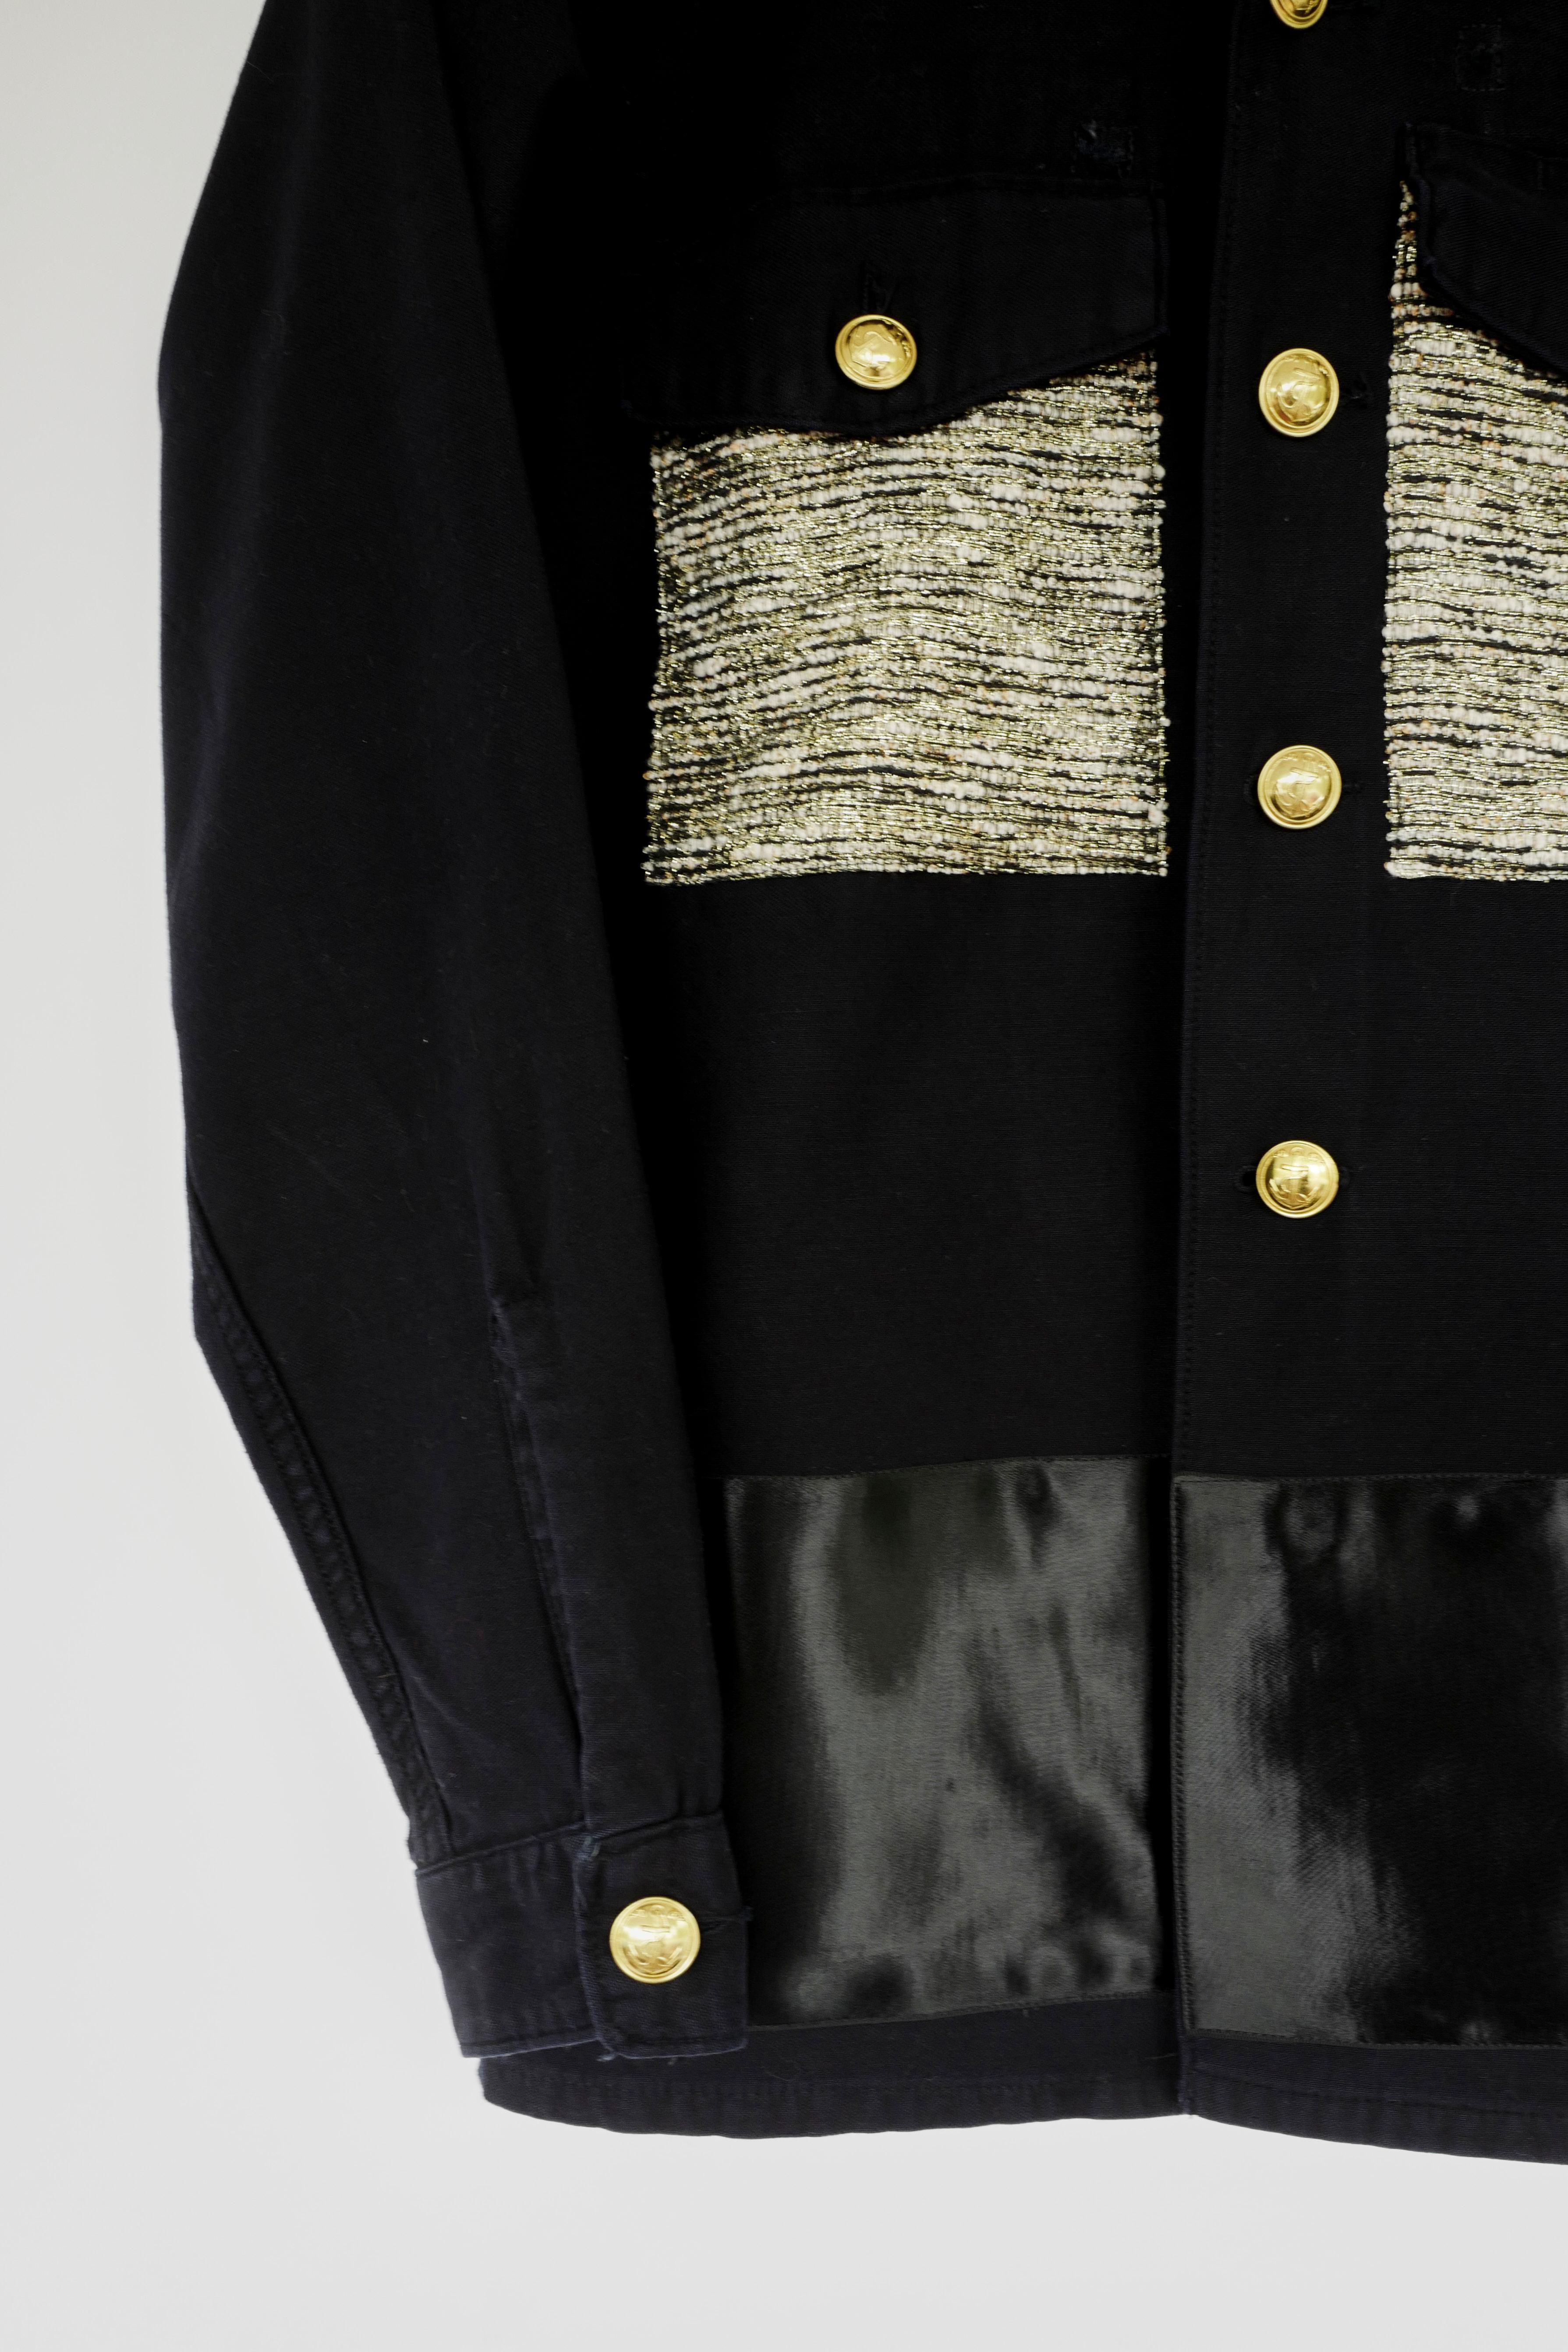 J Dauphin Upcycled Vintage Sustainable Black Military Gold Lurex Tweed Silk Ribbon Jacket

•	Brand: J Dauphin
•	Original Vintage Military Jacket from 1960-1970
•	Body: 100% Cotton in Dyed Black
•	Trim:  Dead stock Gold Lurex Tweed pockets, White